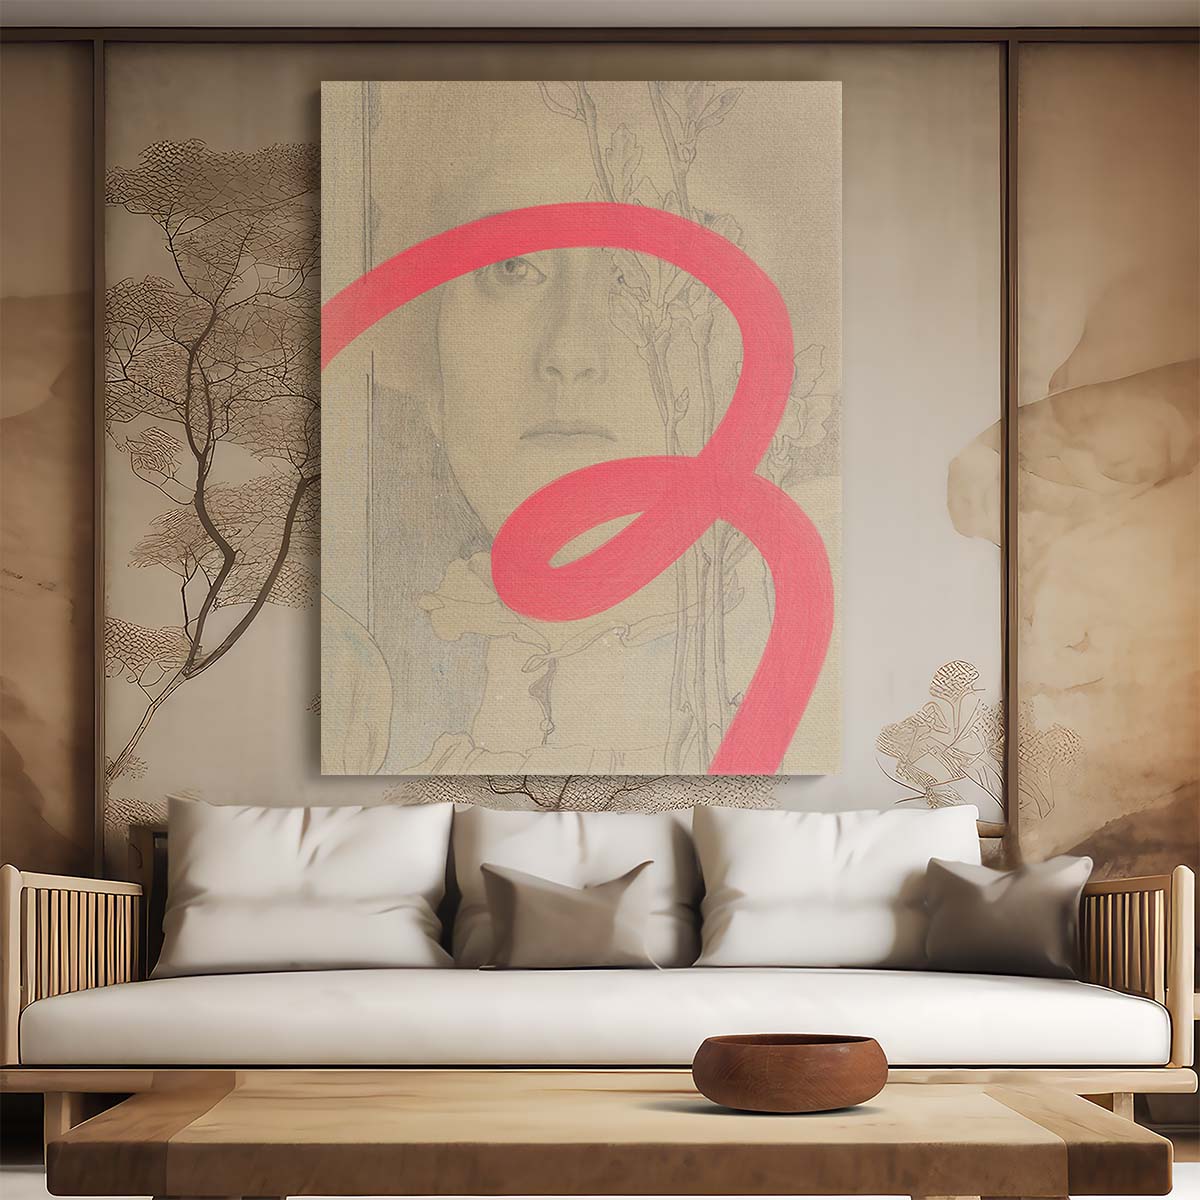 Vintage Neon Woman Abstract Illustration Wall Art by Yopie Studio by Luxuriance Designs, made in USA